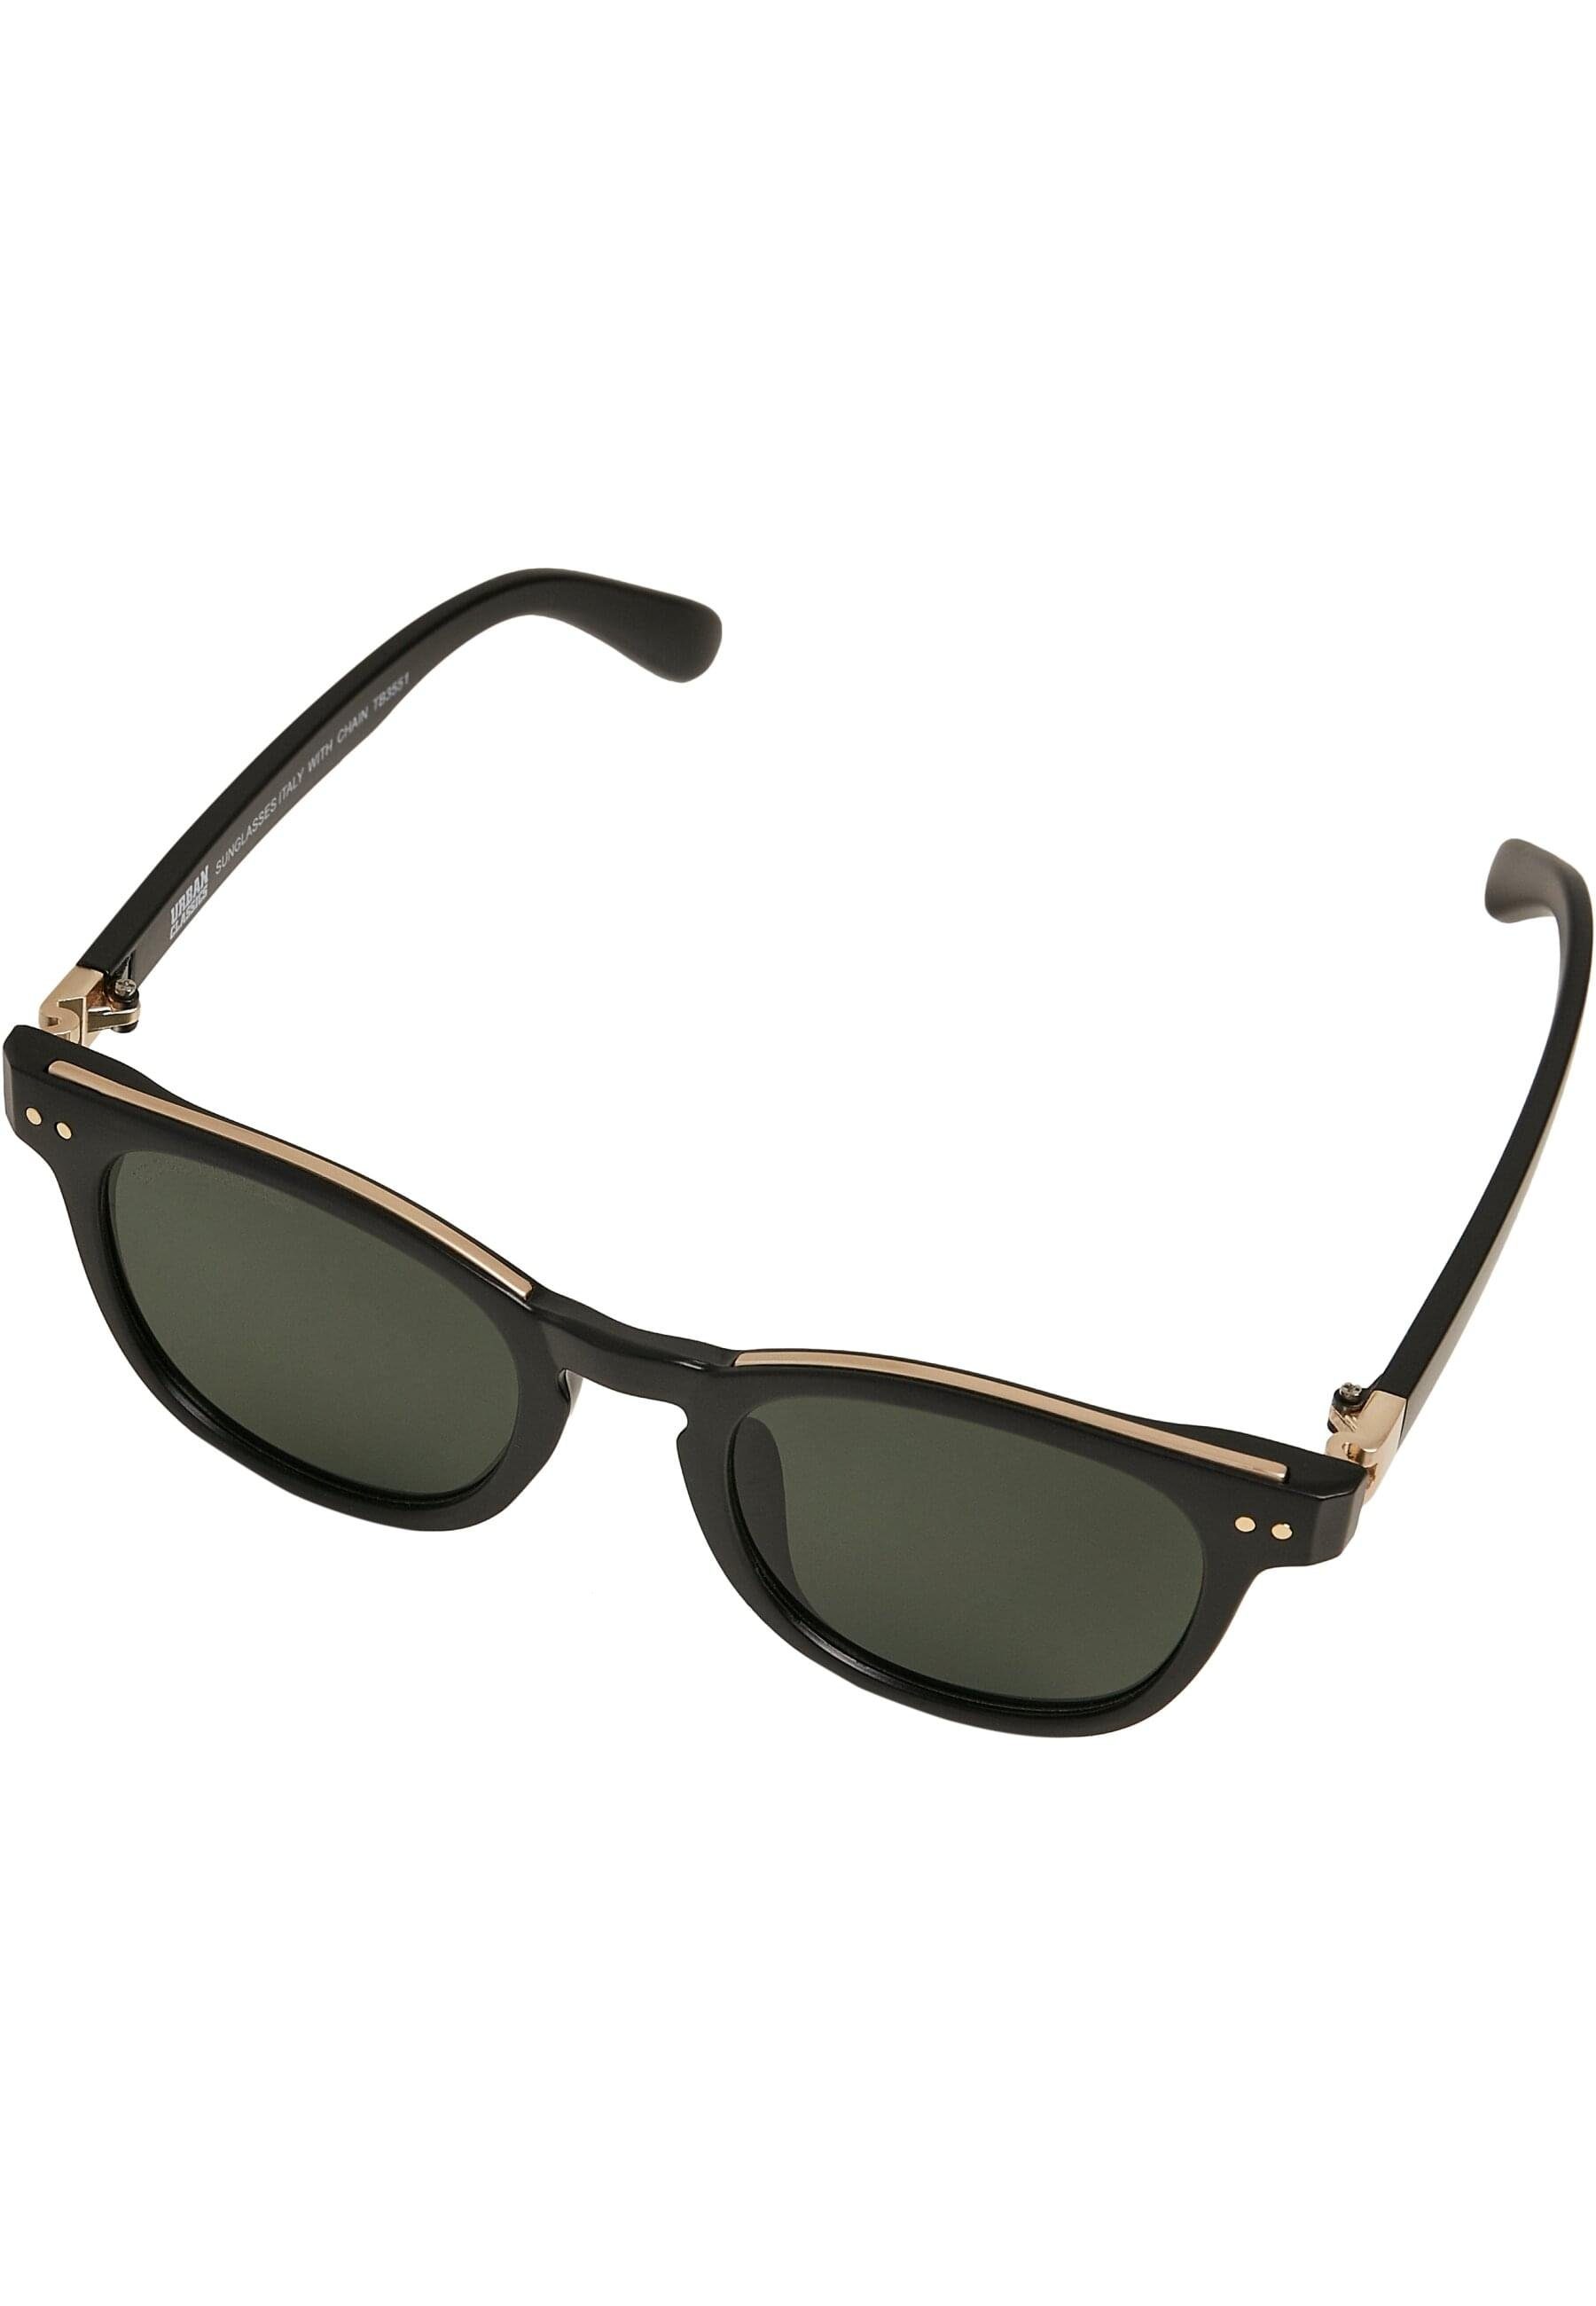 URBAN CLASSICS Sonnenbrille Unisex Italy chain black/gold/gold with Sunglasses